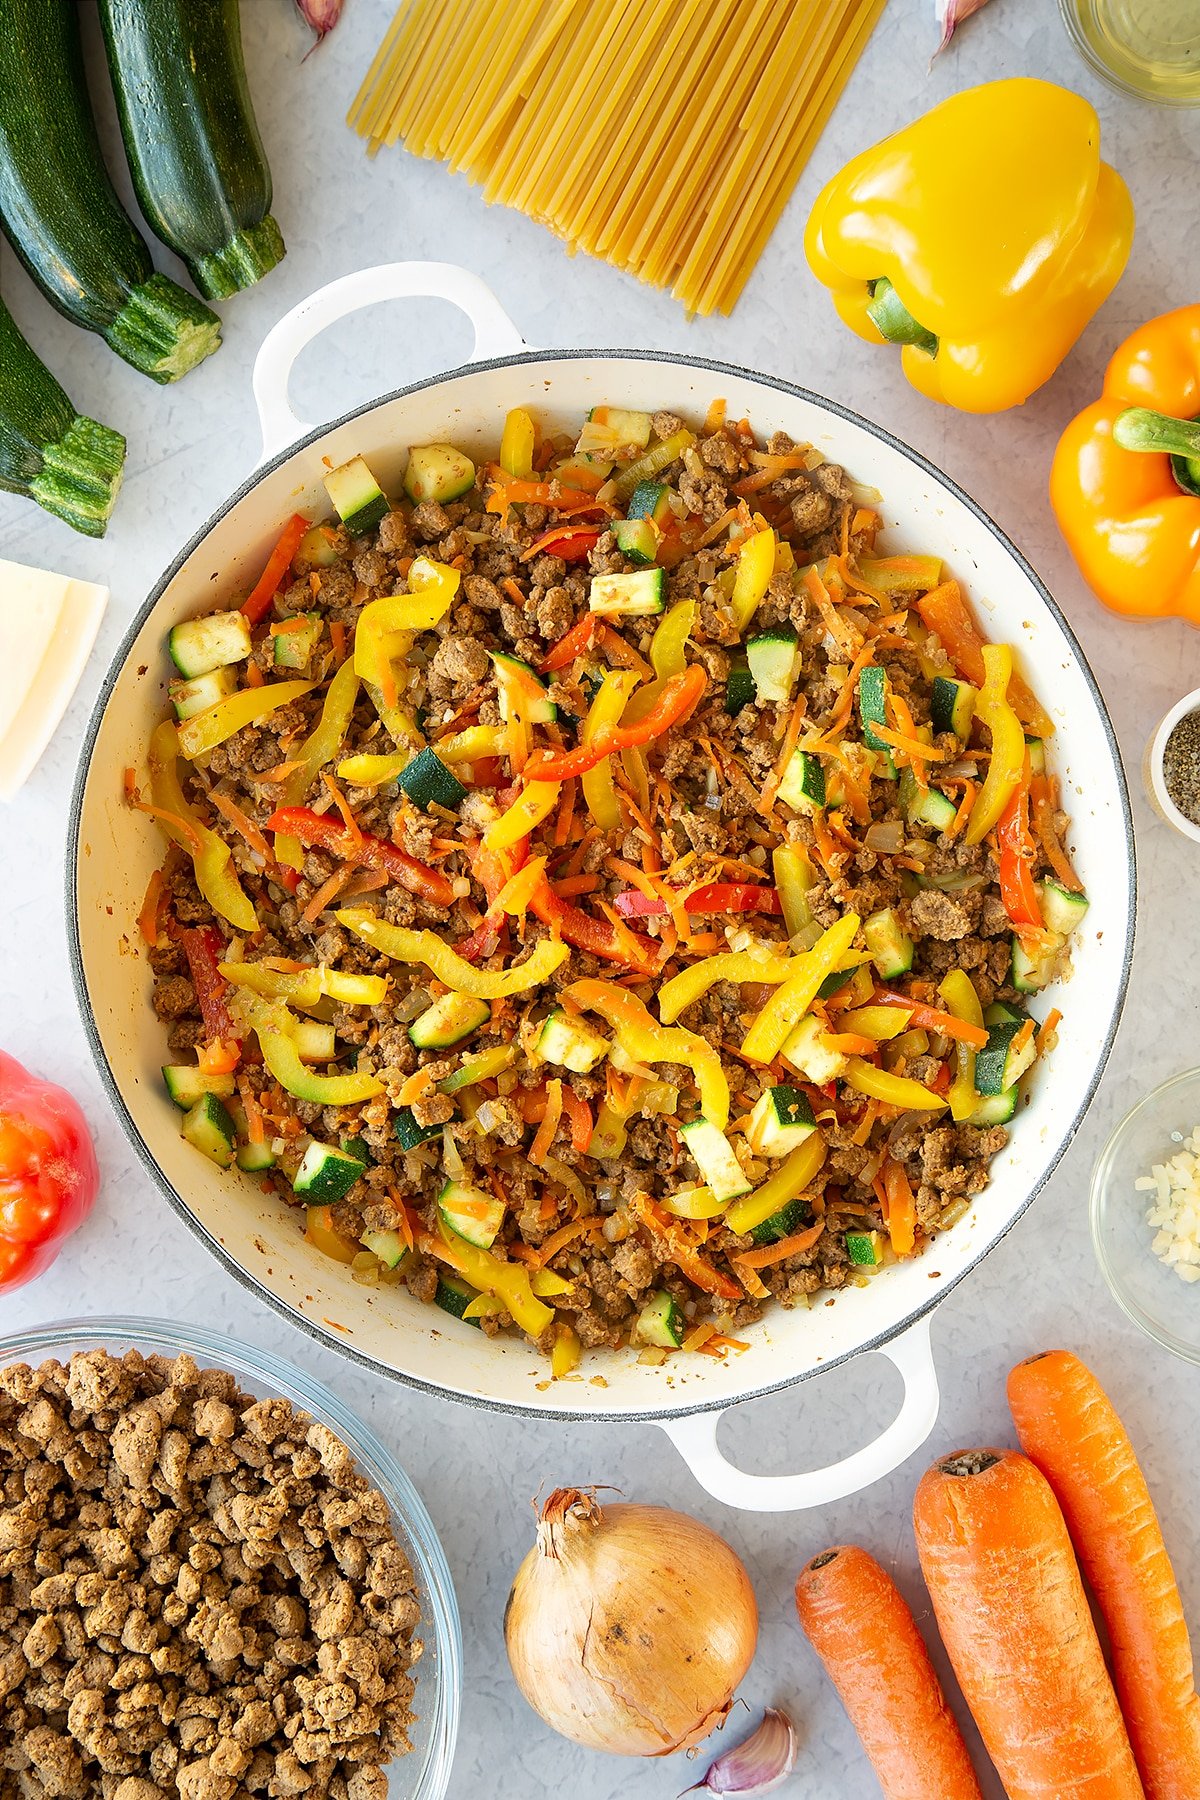 Veggie mince, garlic, onion, courgette, carrot and peppers sweated in a large pan. Ingredients to make one pot vegan bolognese surround the pan.